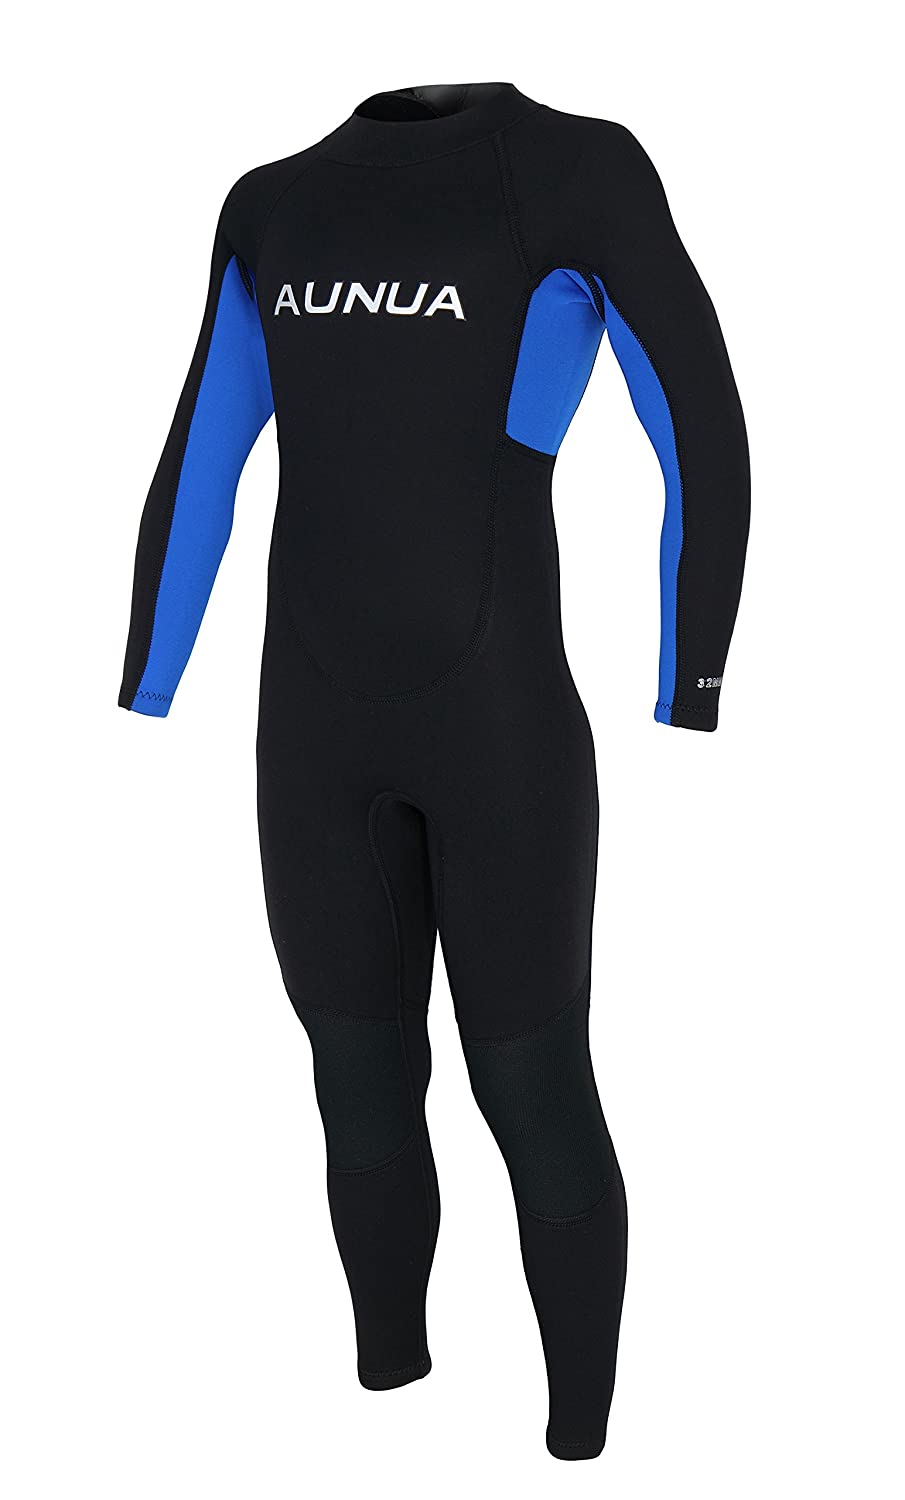 Aunua Youth 3/2mm Neoprene Wetsuits for Kids Full Wetsuit Swimming Suit Keep Warm - Size 6